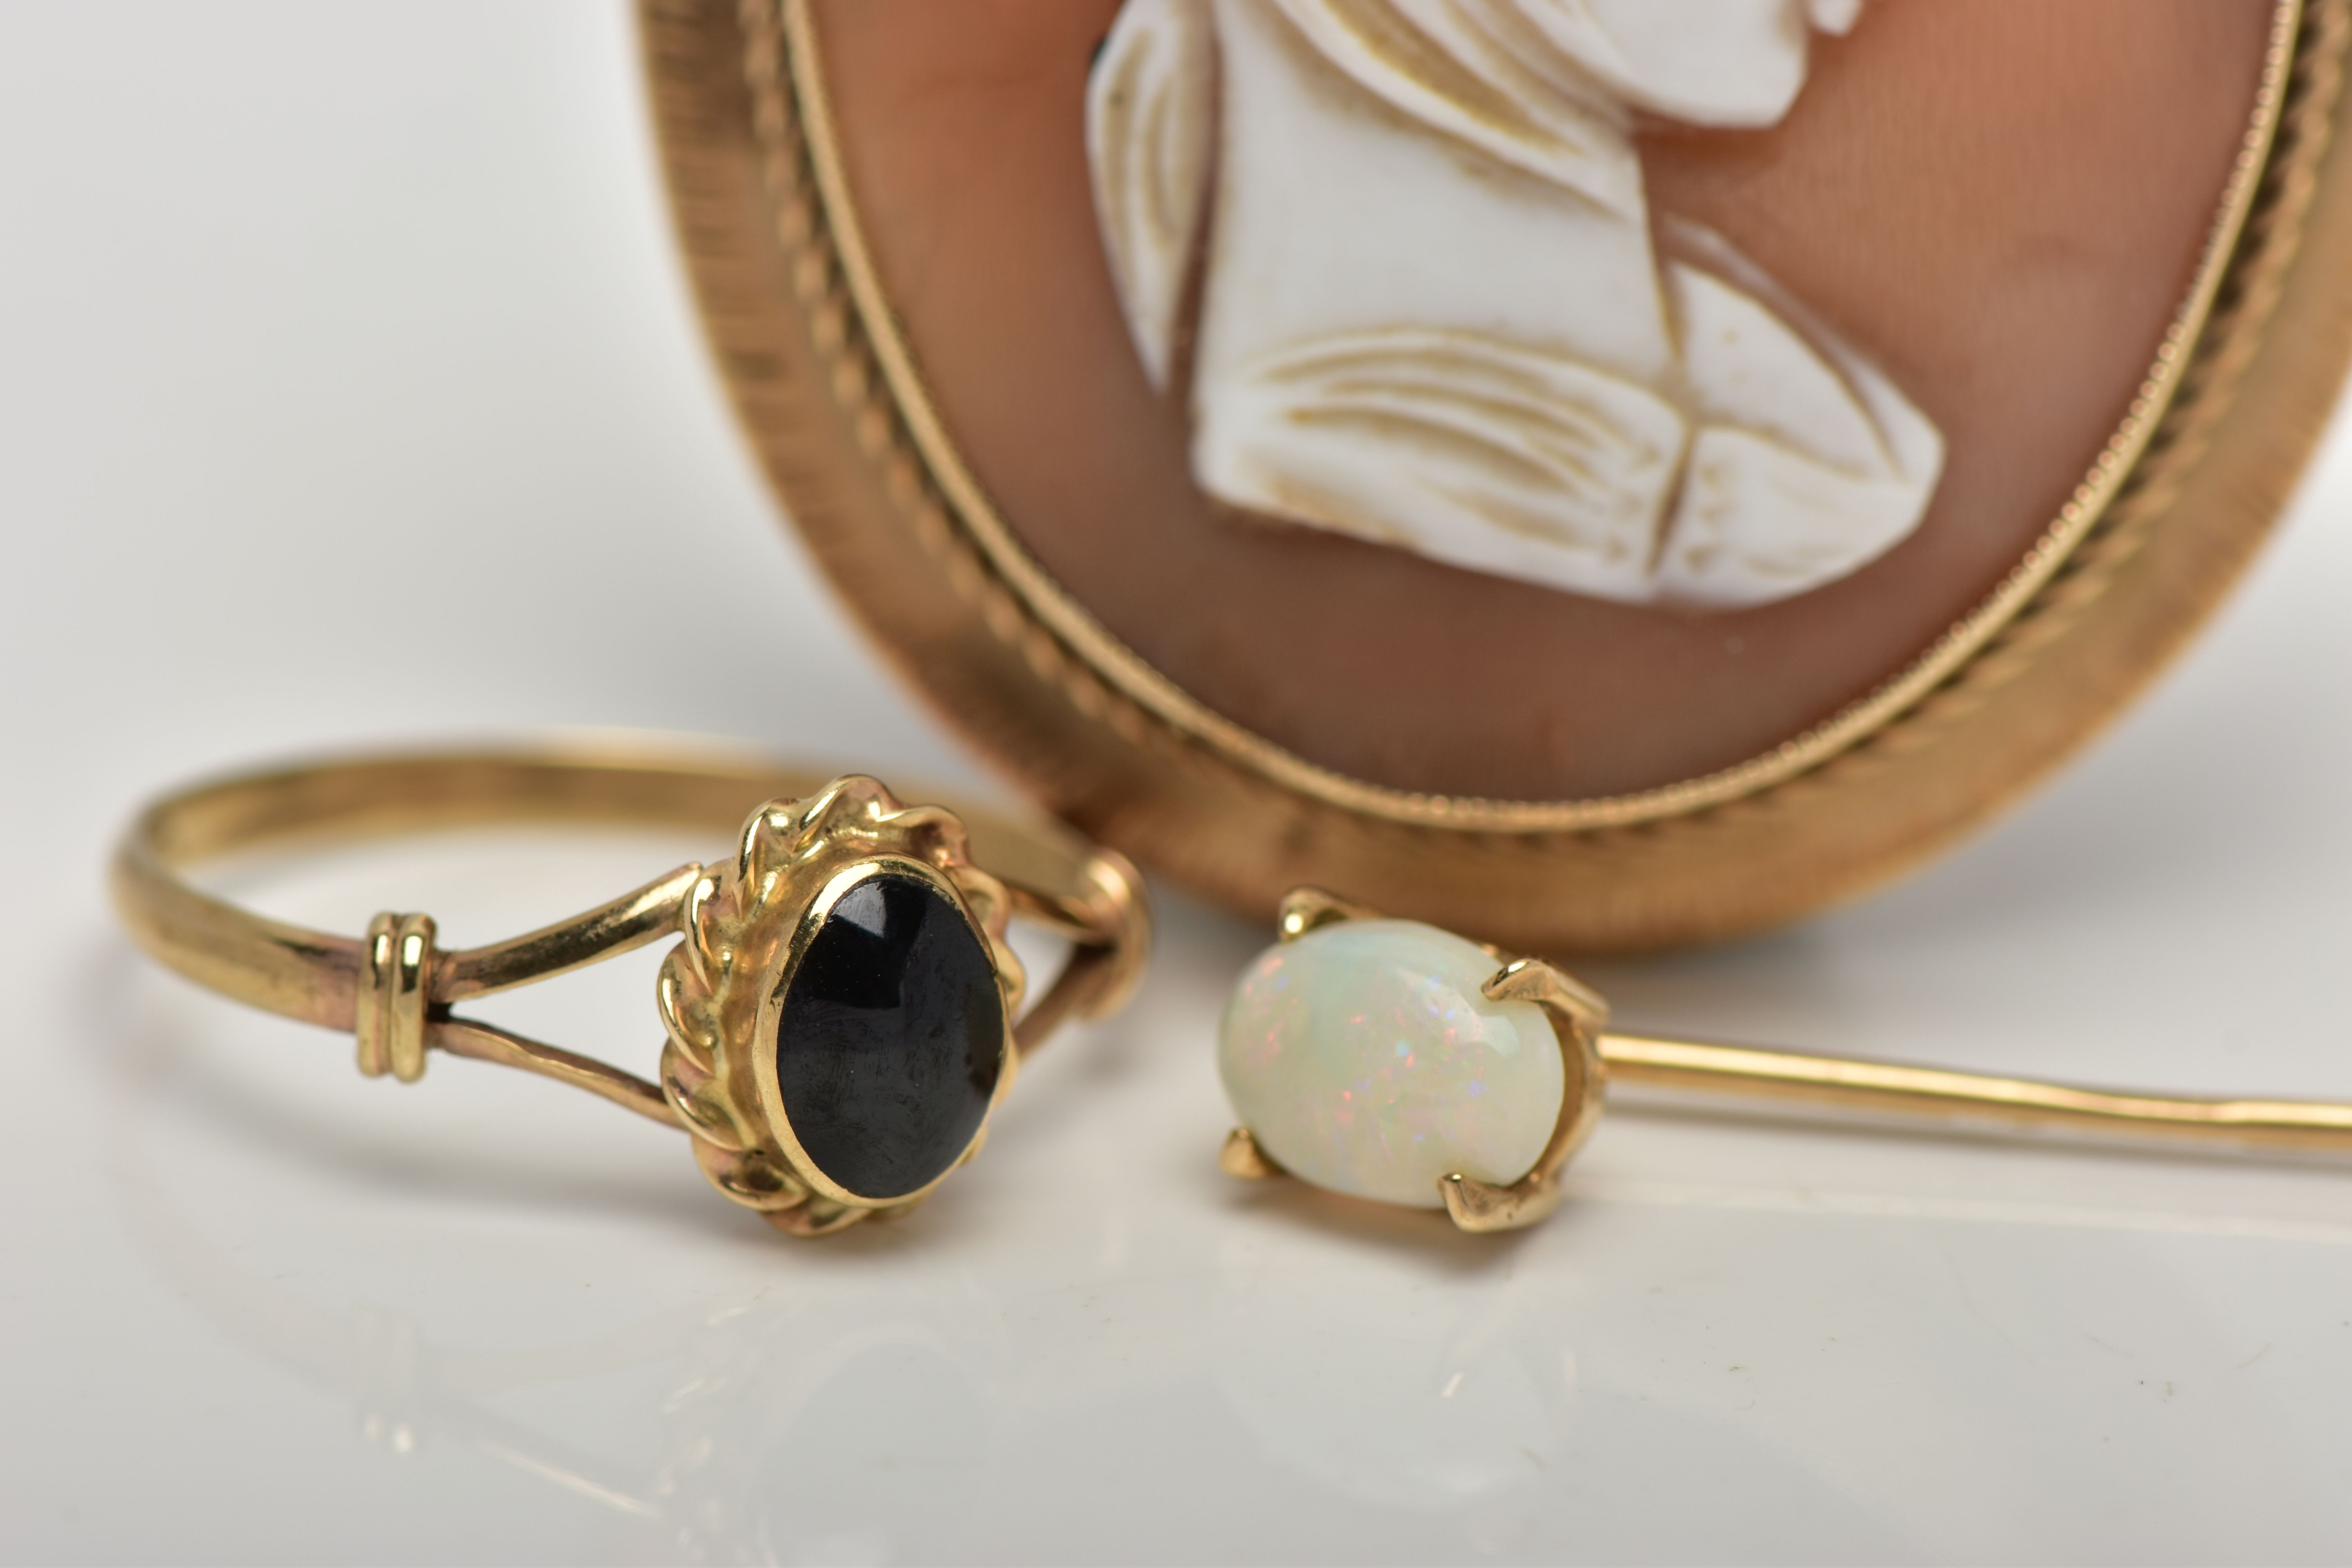 A 9CT GOLD RING, STICK PIN AND CAMEO BROOCH, an oval cabochon onyx stone, set with a rope twist - Image 2 of 4